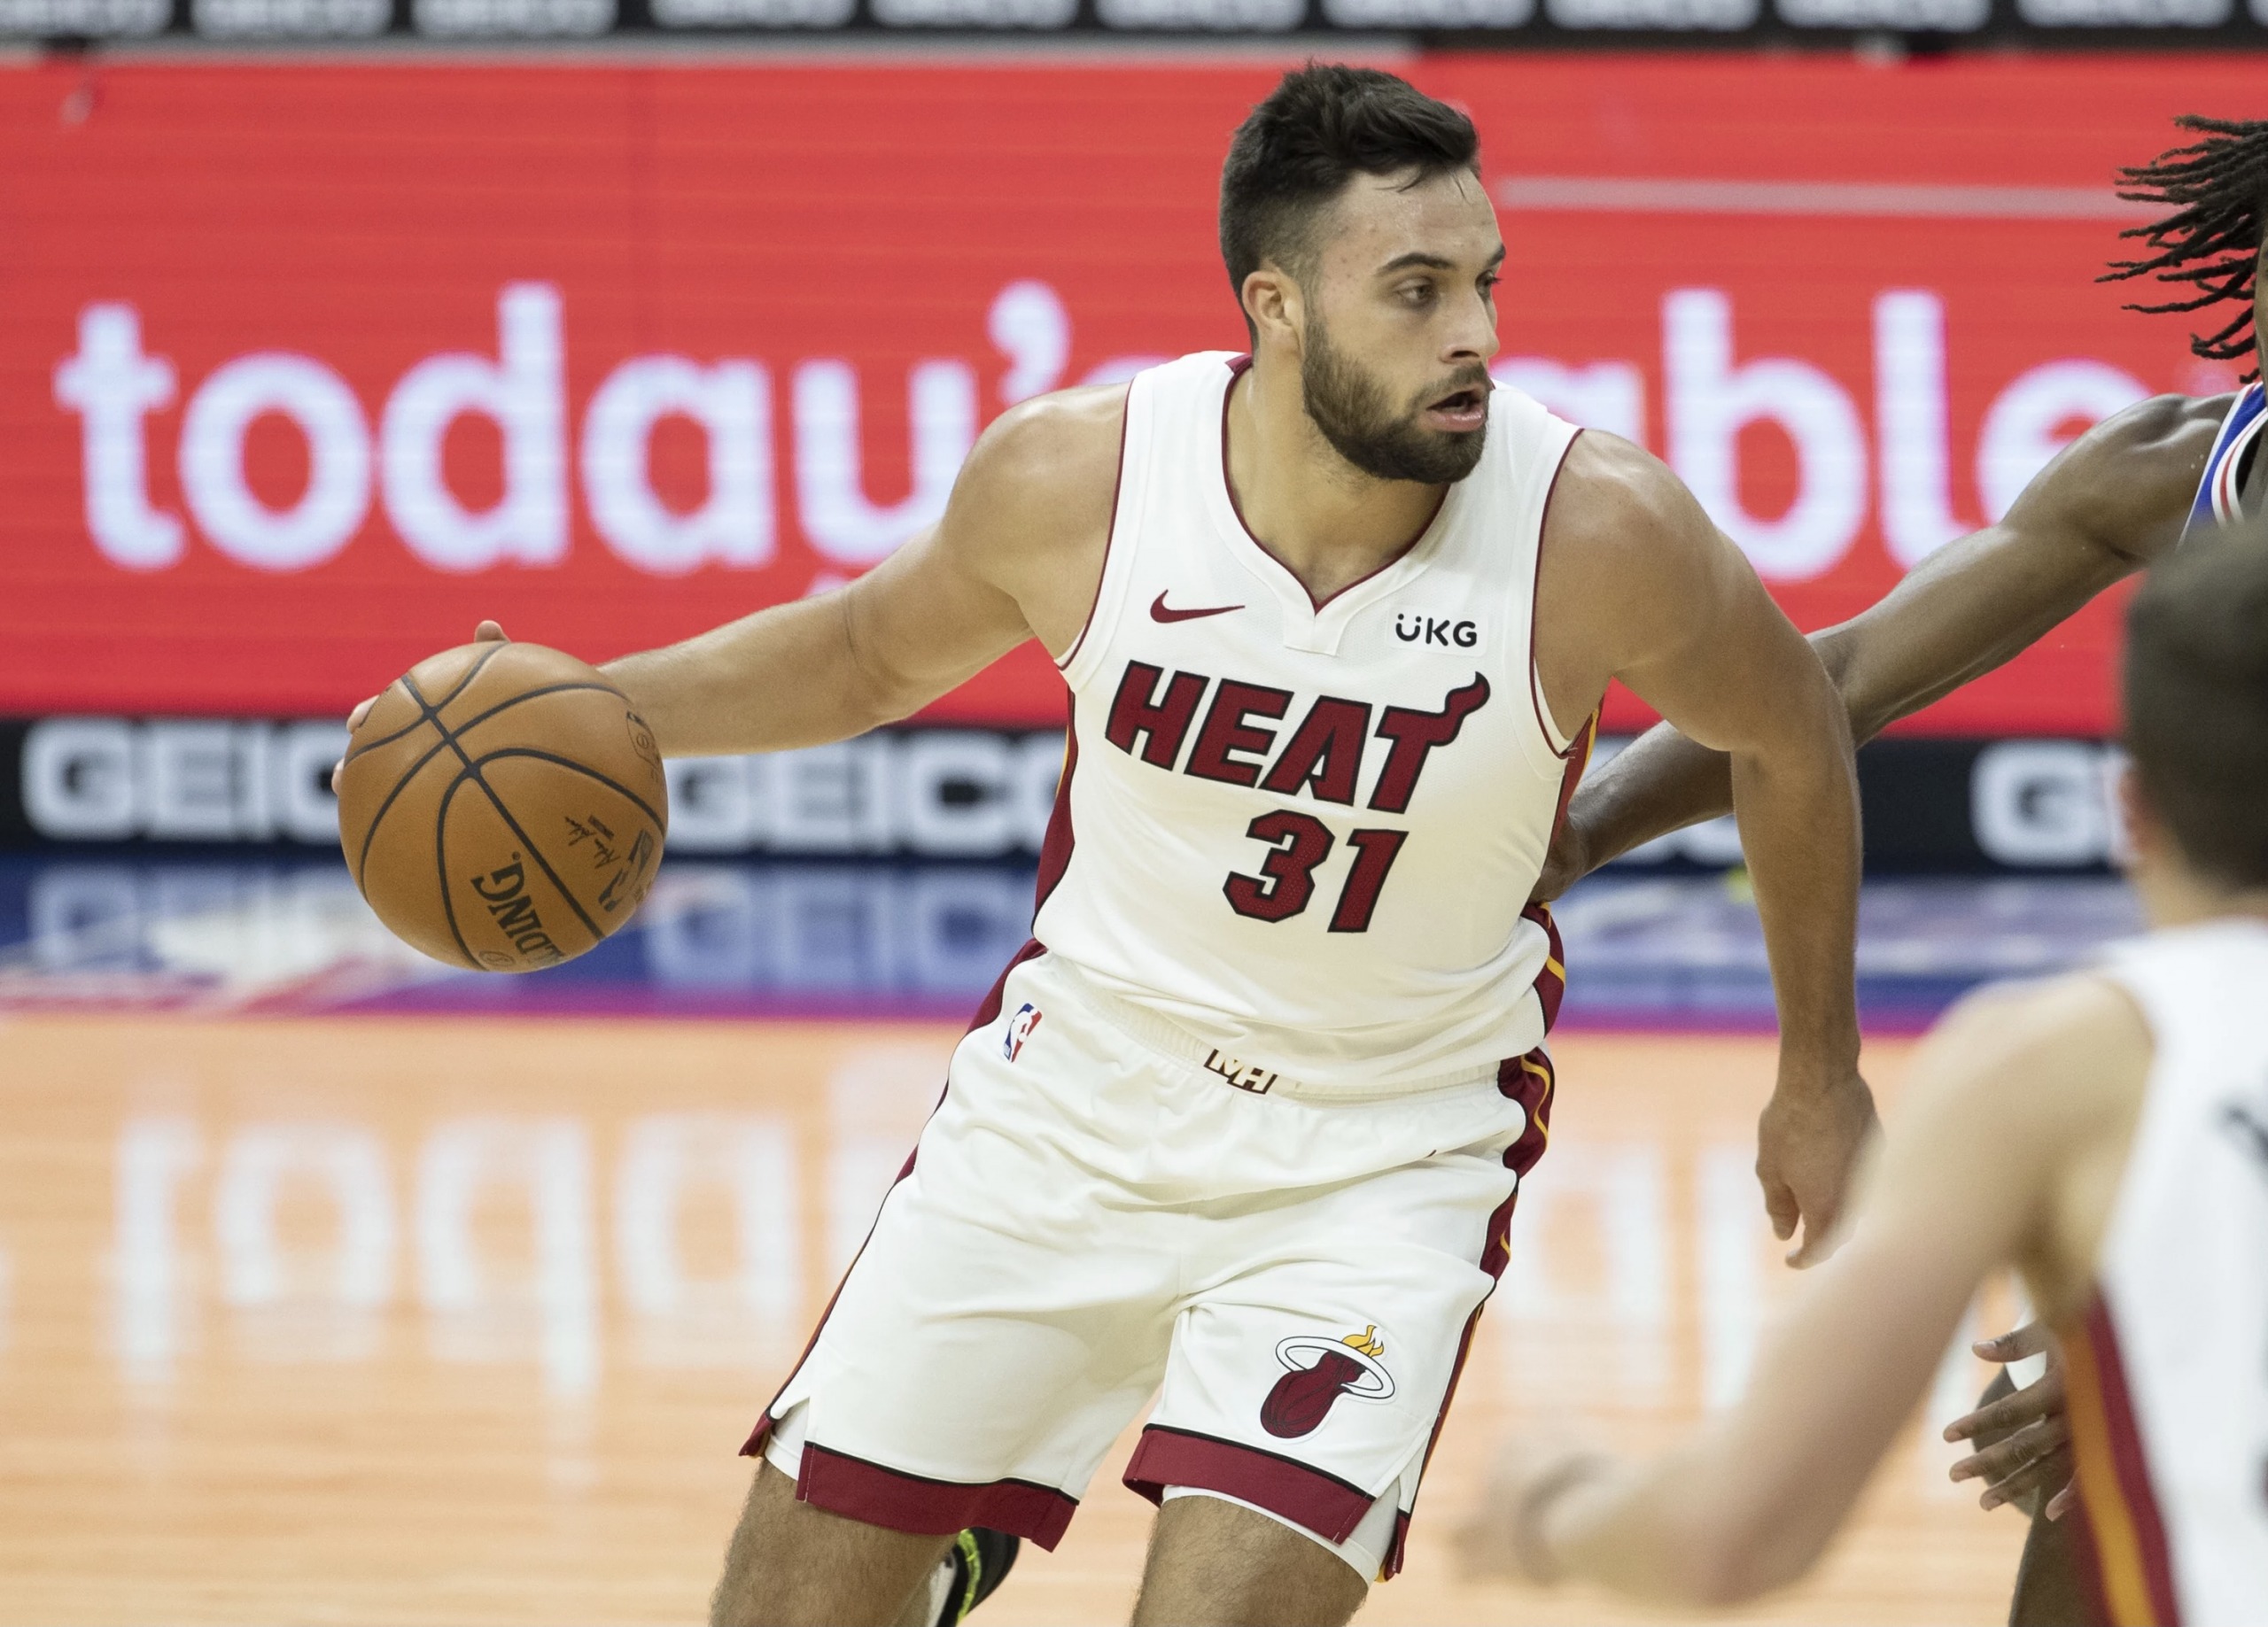 Keeping the fire burning: Miami Heat's Max Strus seeks to build on